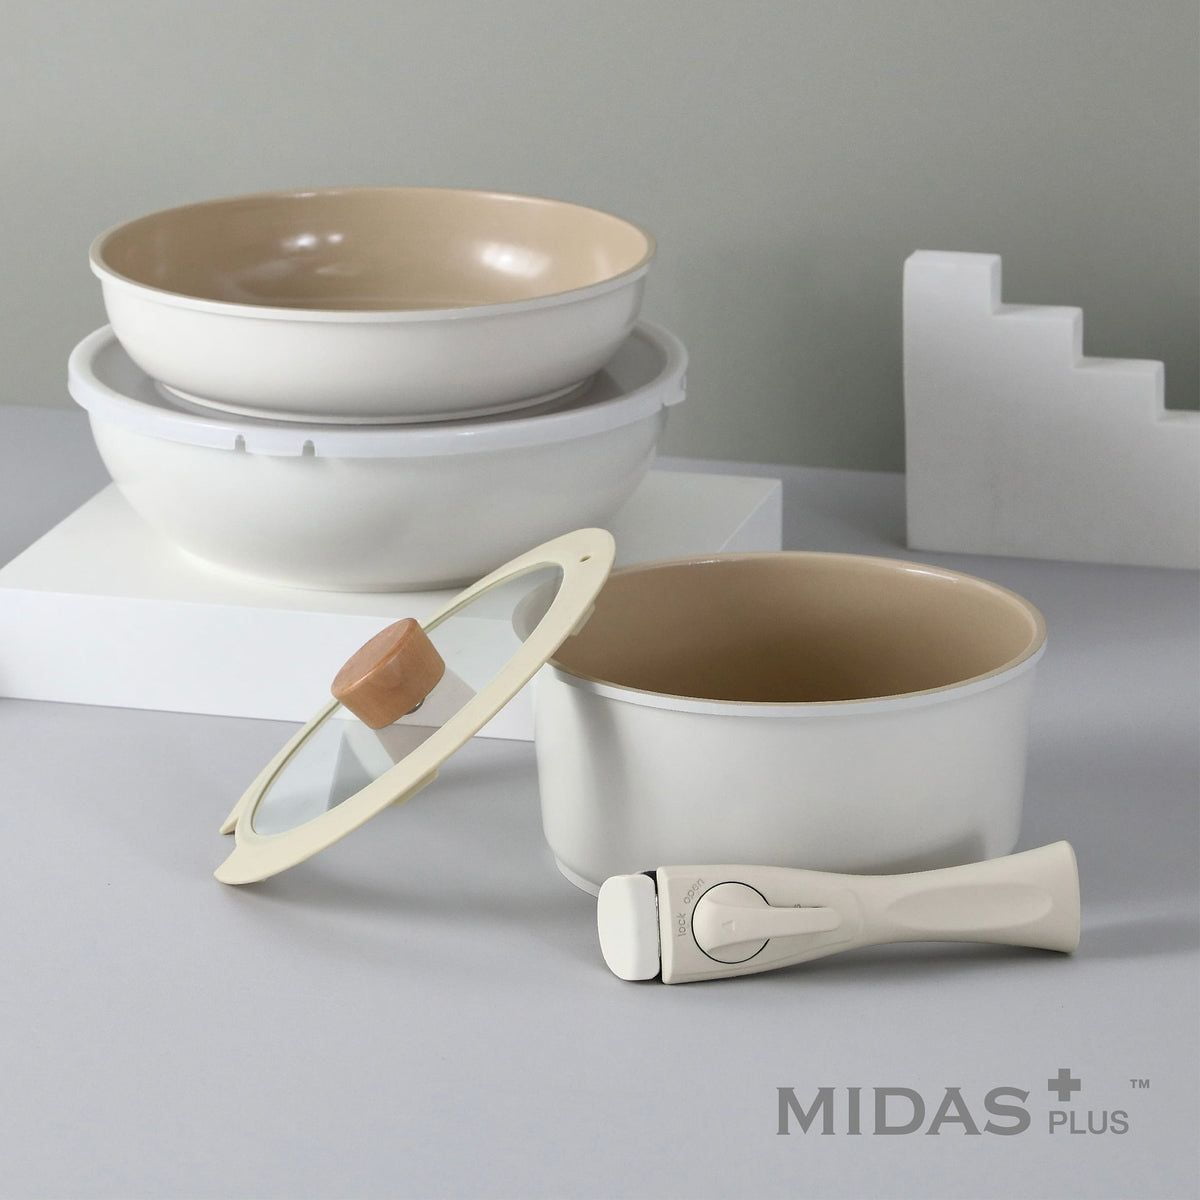 Neoflam Midas Plus ceramic cookware brings design and performance to the  kitchen - Newegg Insider